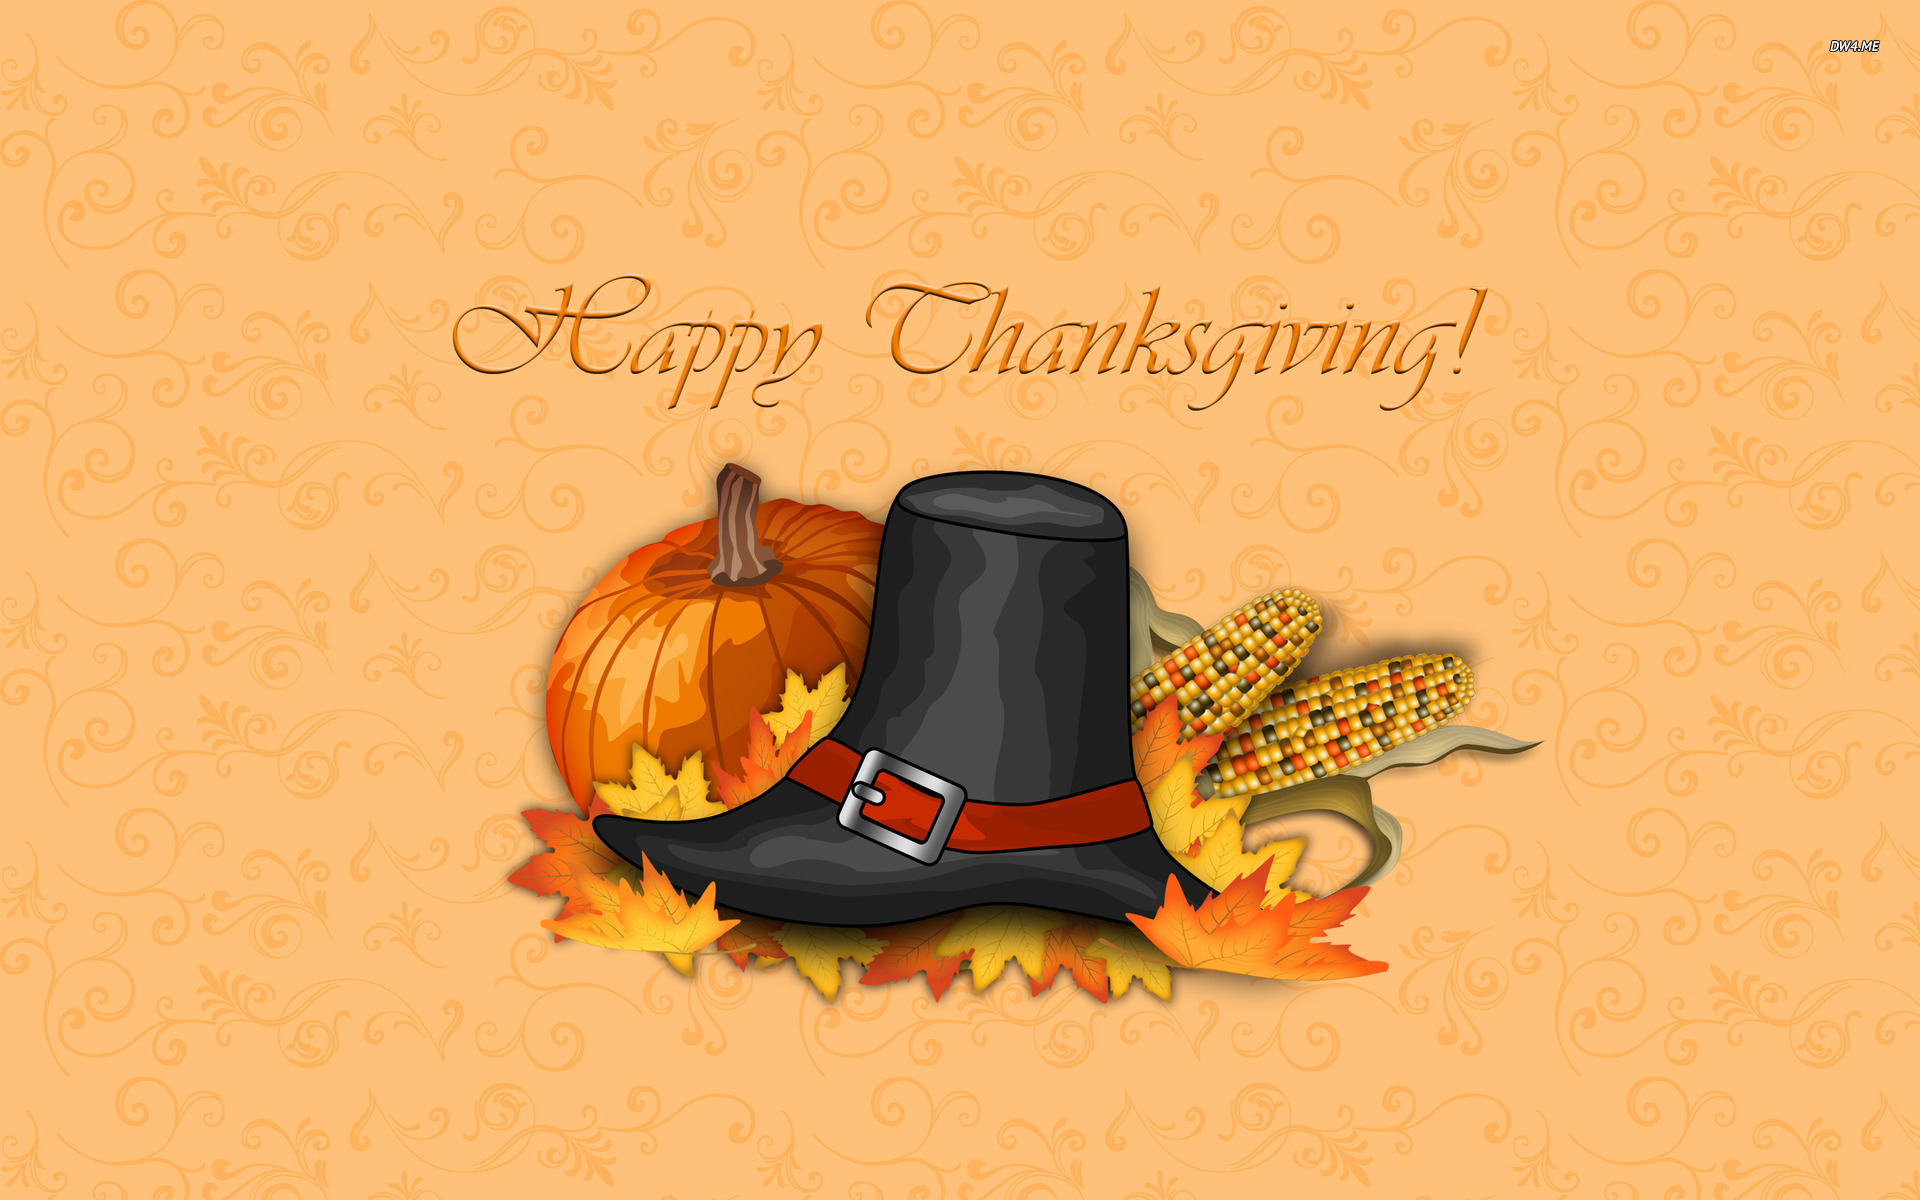 Happy Thanksgiving wallpaper   Holiday wallpapers   1787